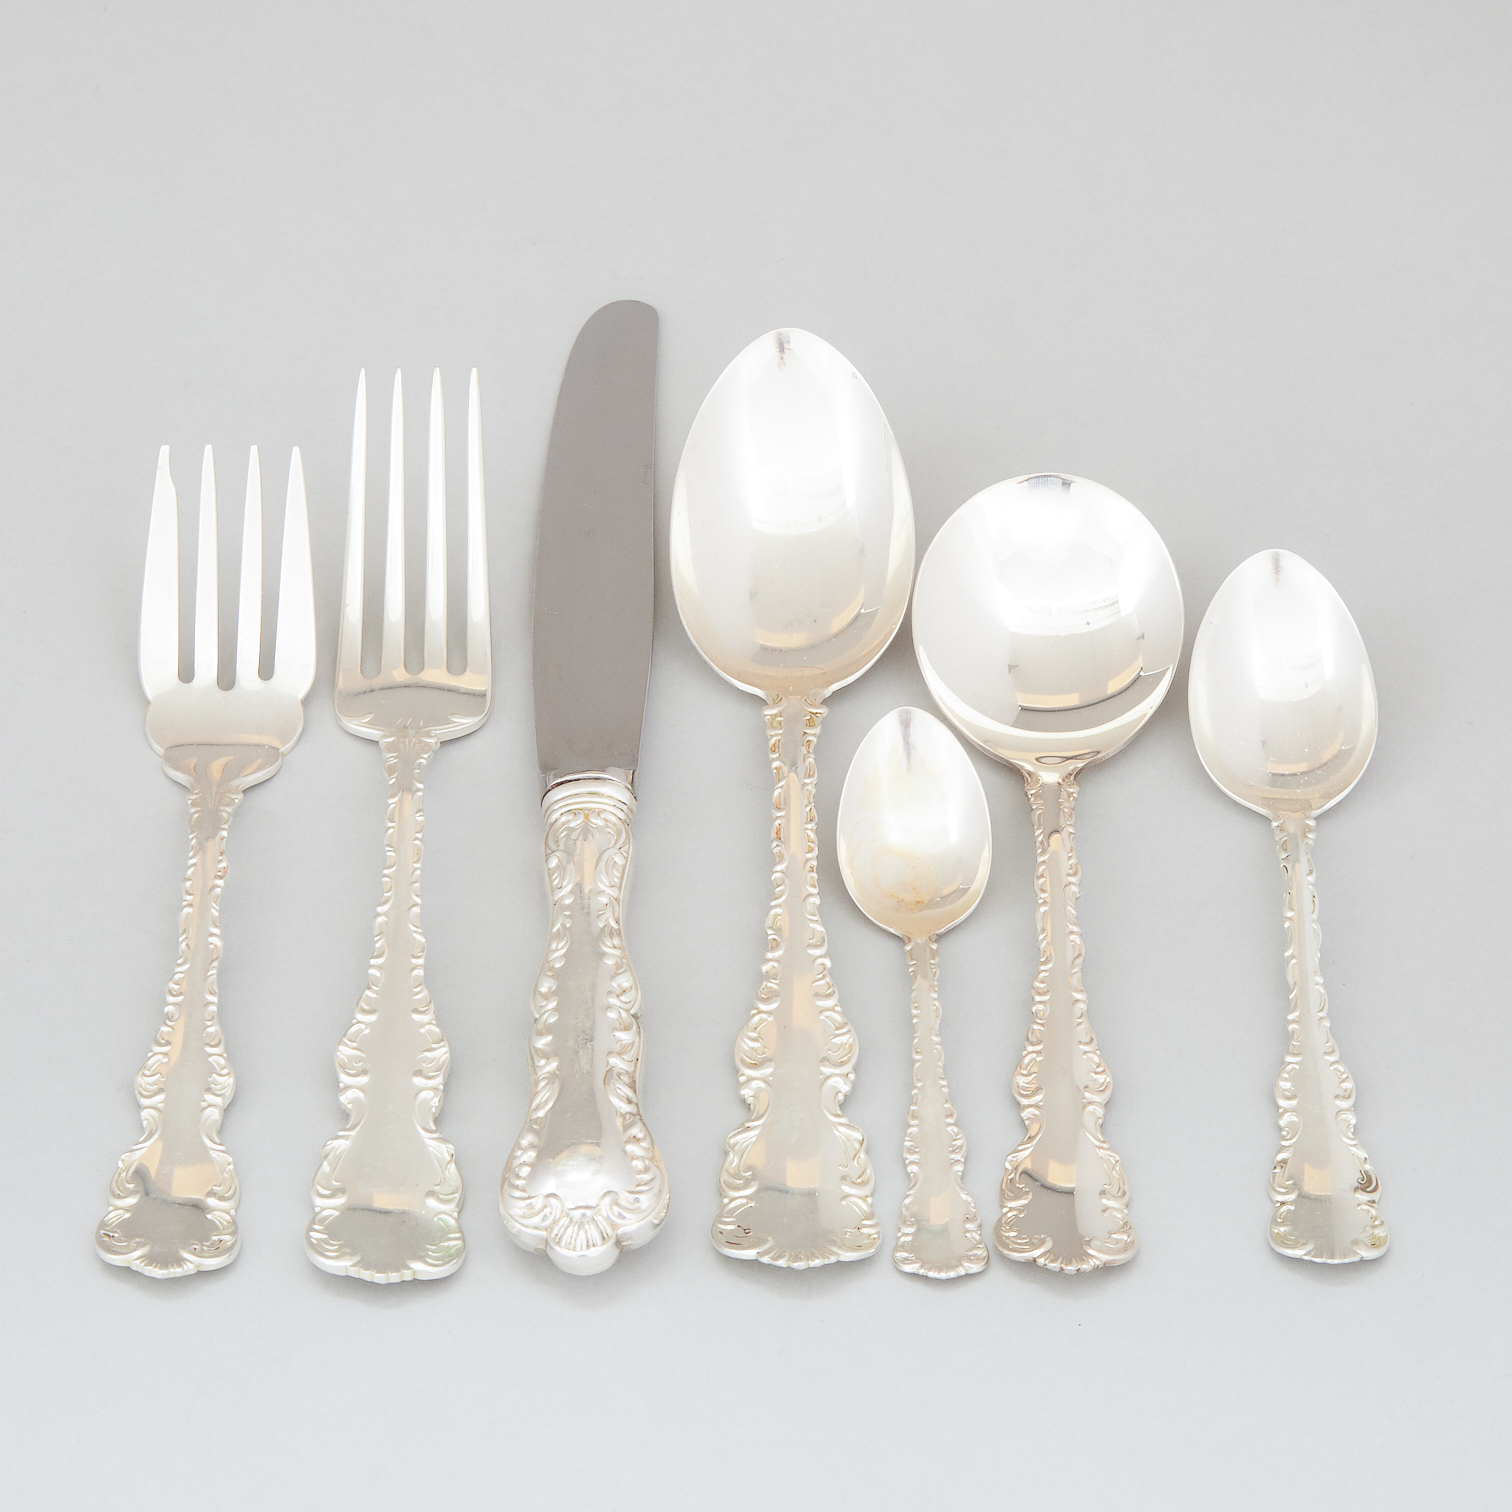 Canadian Silver 'Louis XV' Pattern Flatware, Henry Birks & Sons, Montreal, Que., 20th century